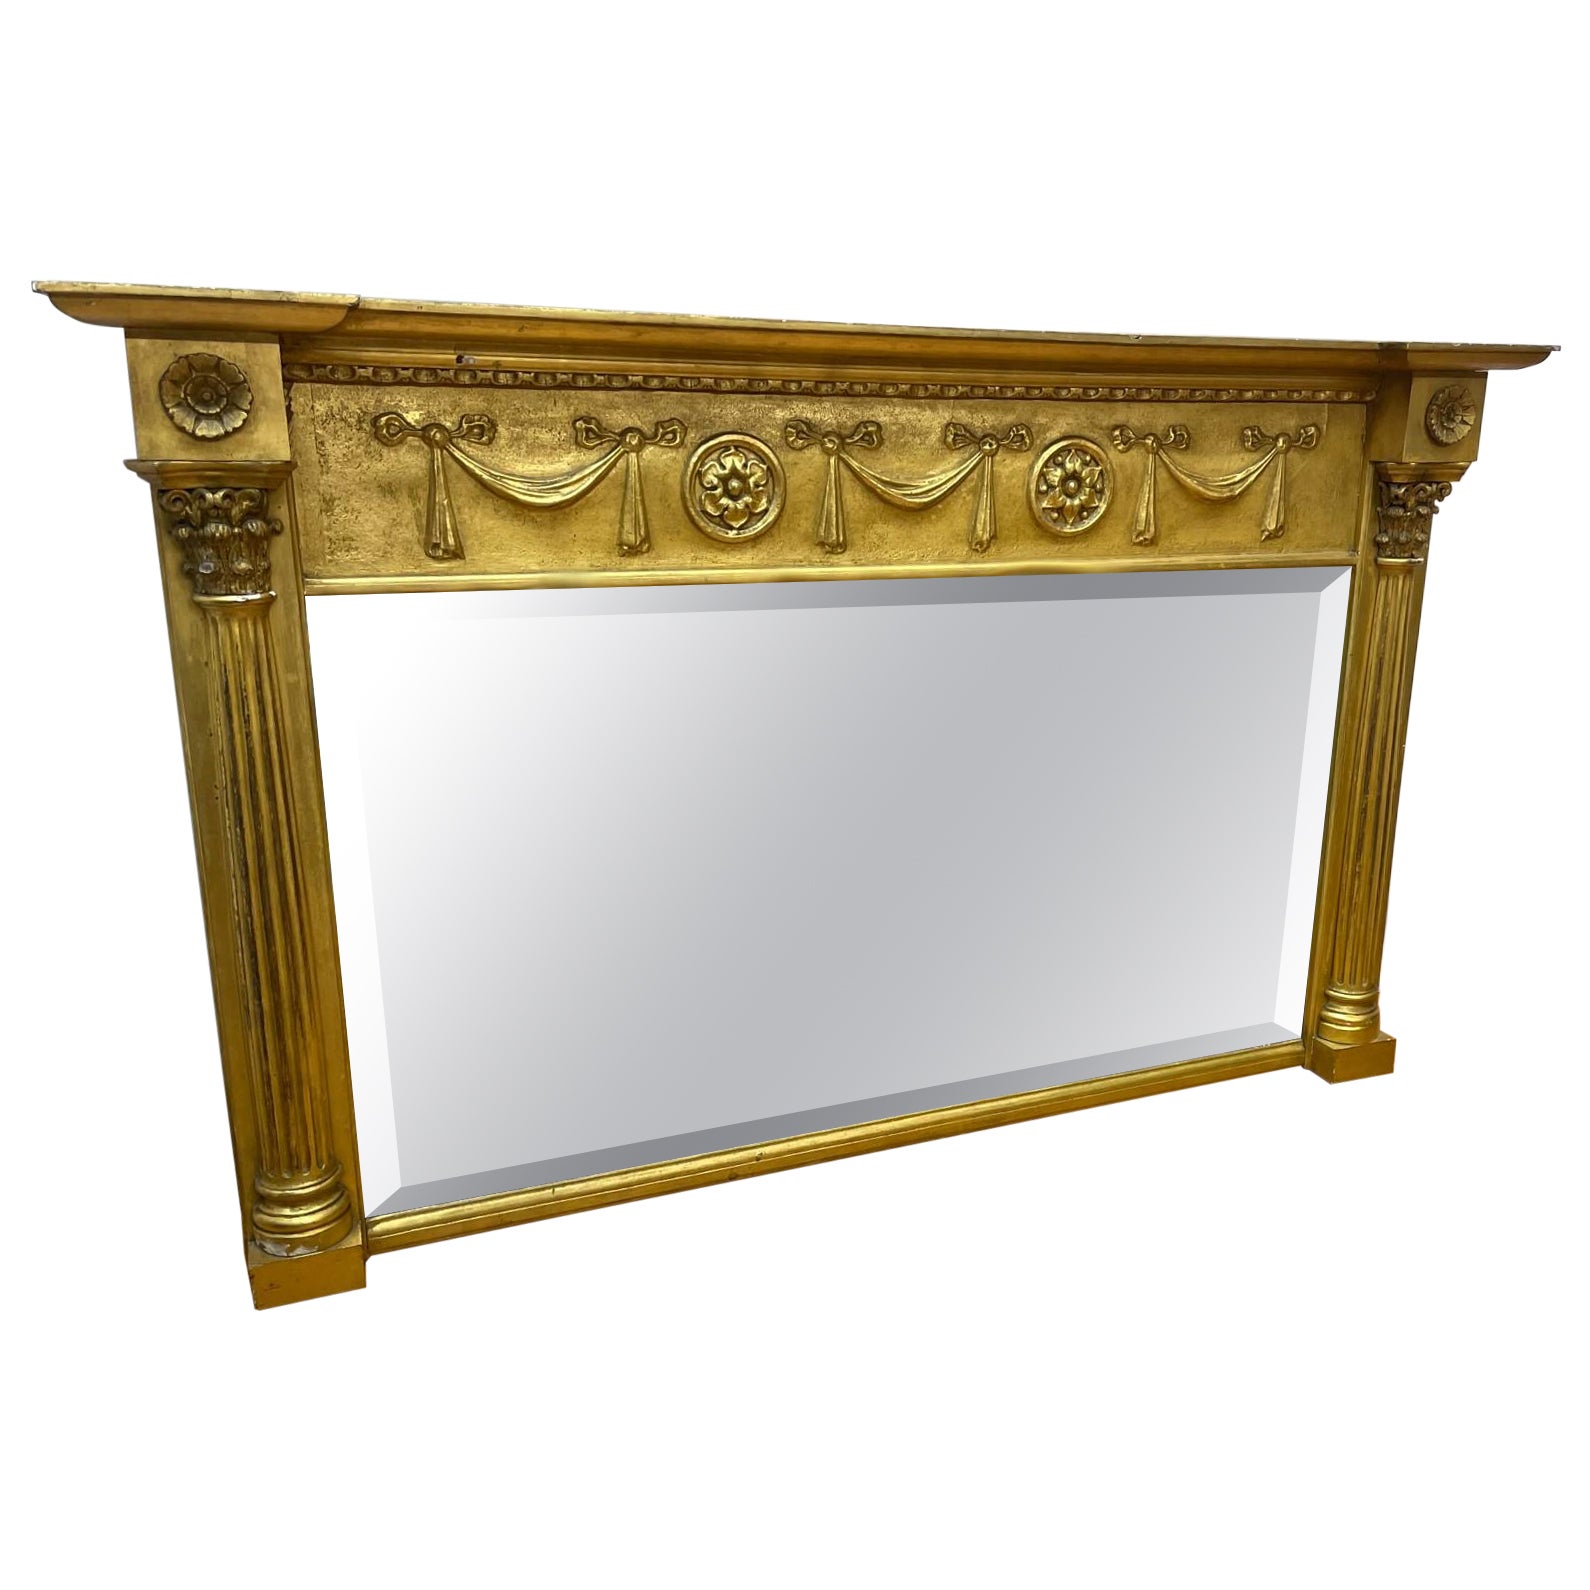 Regency-Style over mantel mirror gilded with ribbon design For Sale